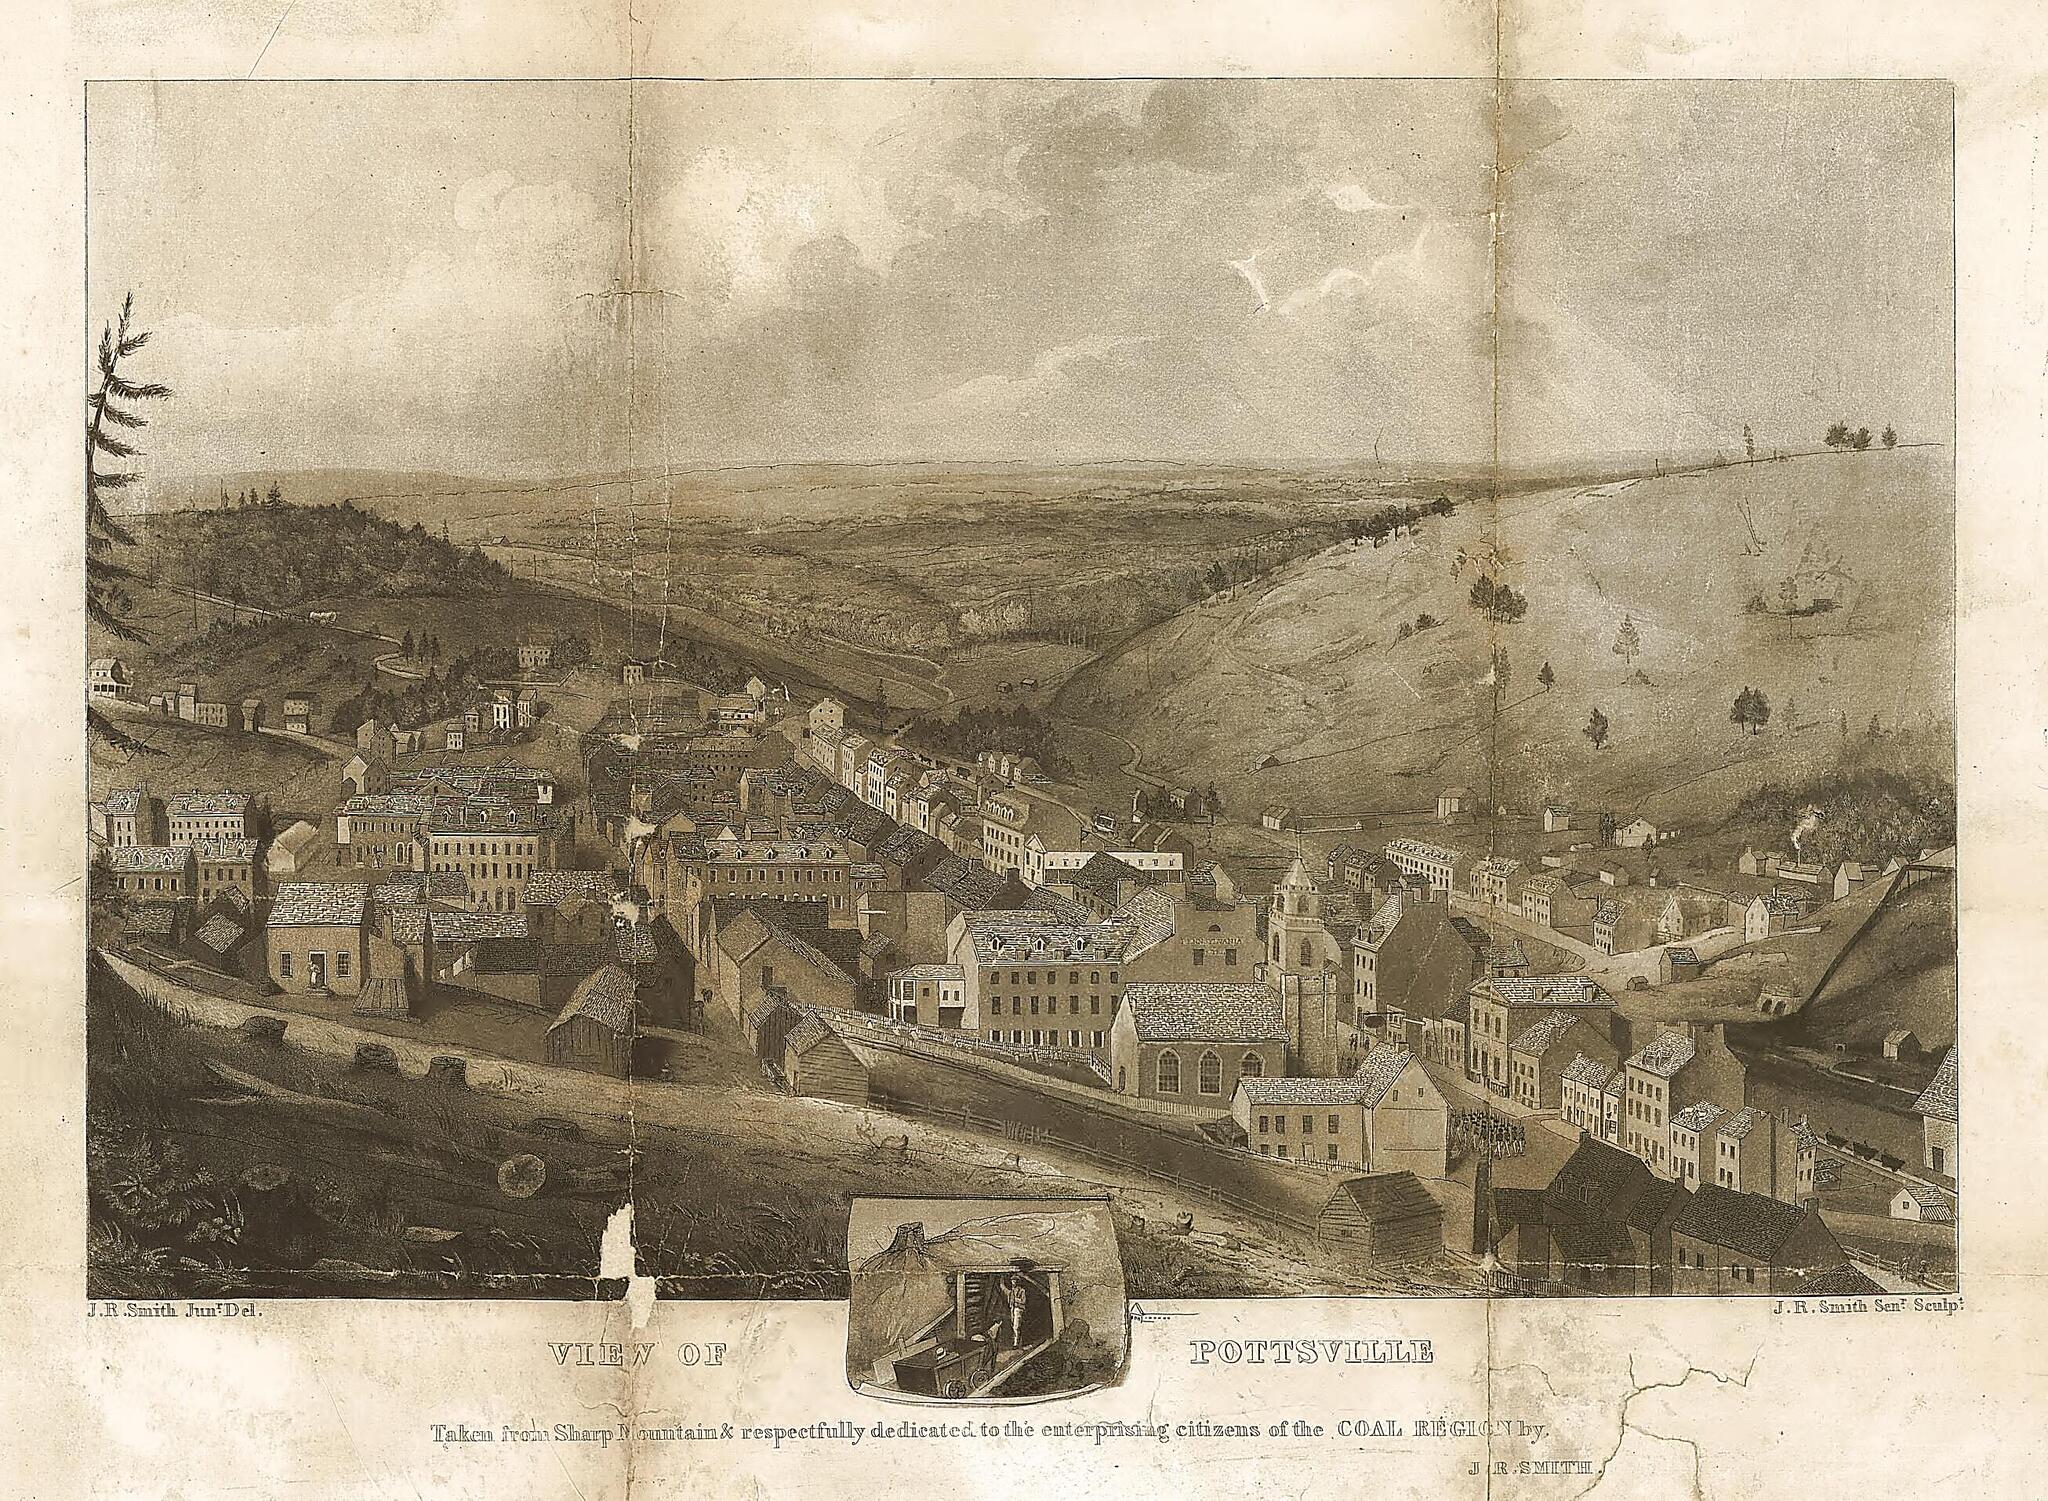 This old map of View of Pottsville Taken from Sharp Mountain &amp; Respectfully Dedicated to the Enterprising Citizens of the Coal Region by J.R. Smith / J.R. Smith, Junr. Del. ; J.R. Smith, Senr. Sculpt from 1833 was created by John Rowson Smith, John Ruben